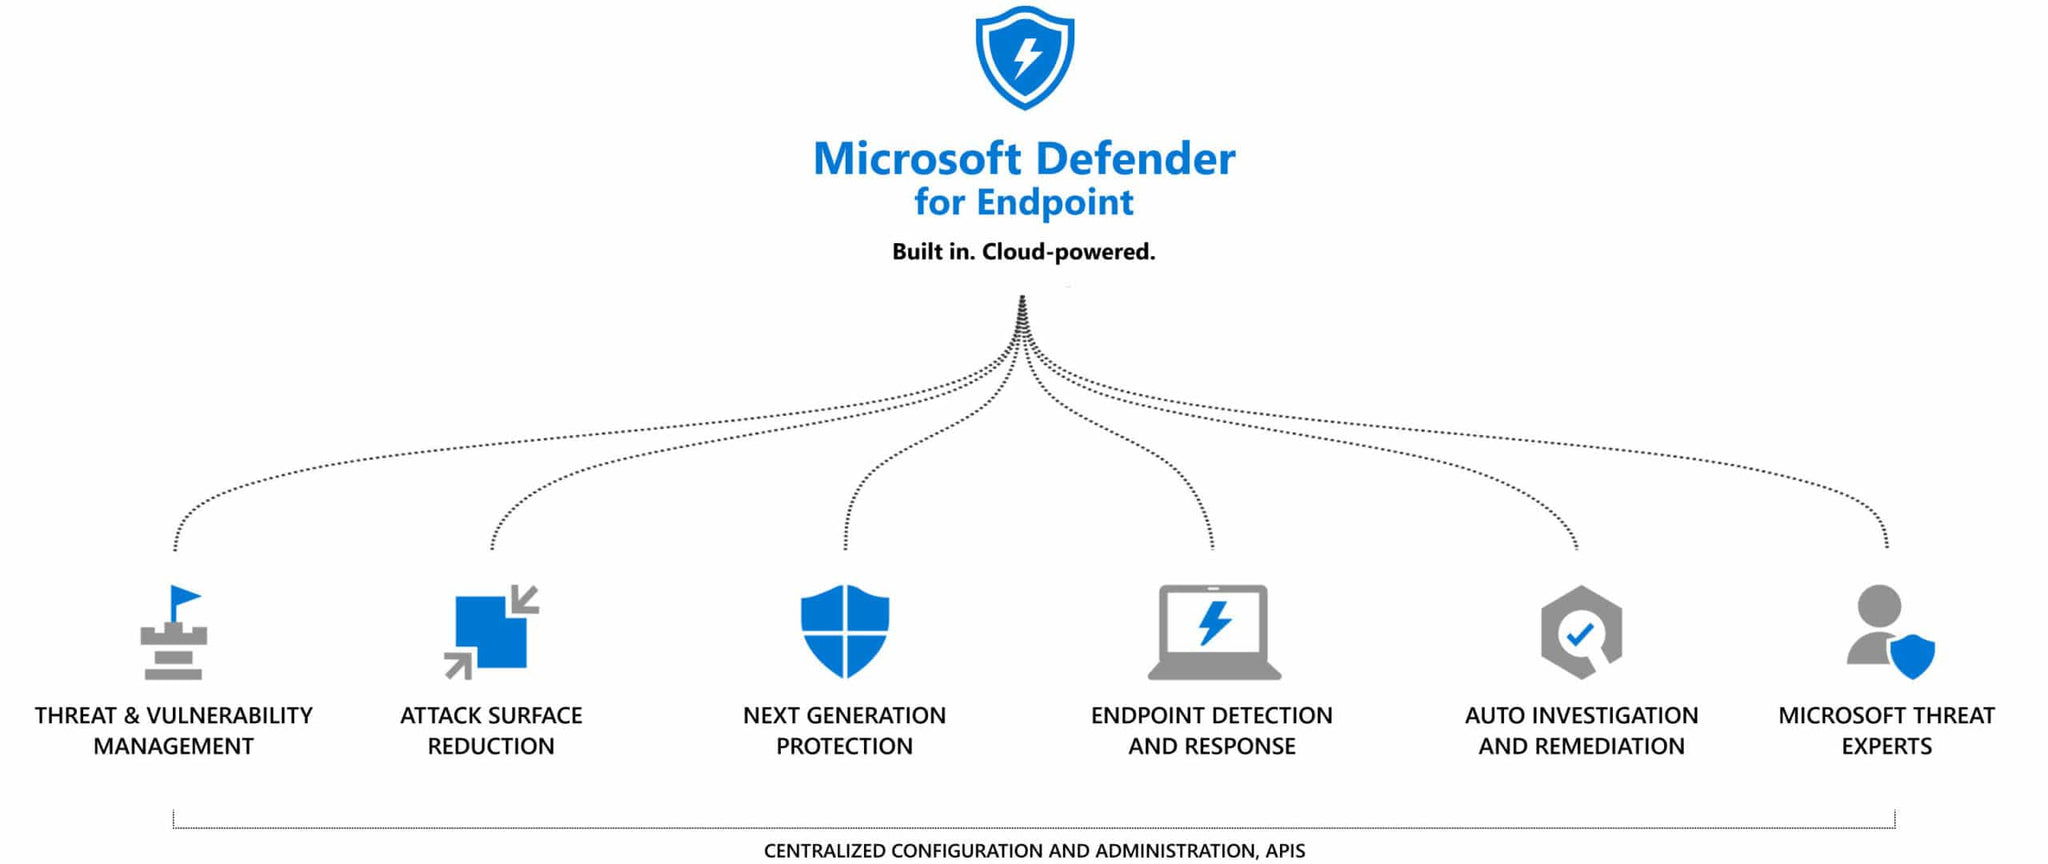 How Much Is Microsoft Defender?